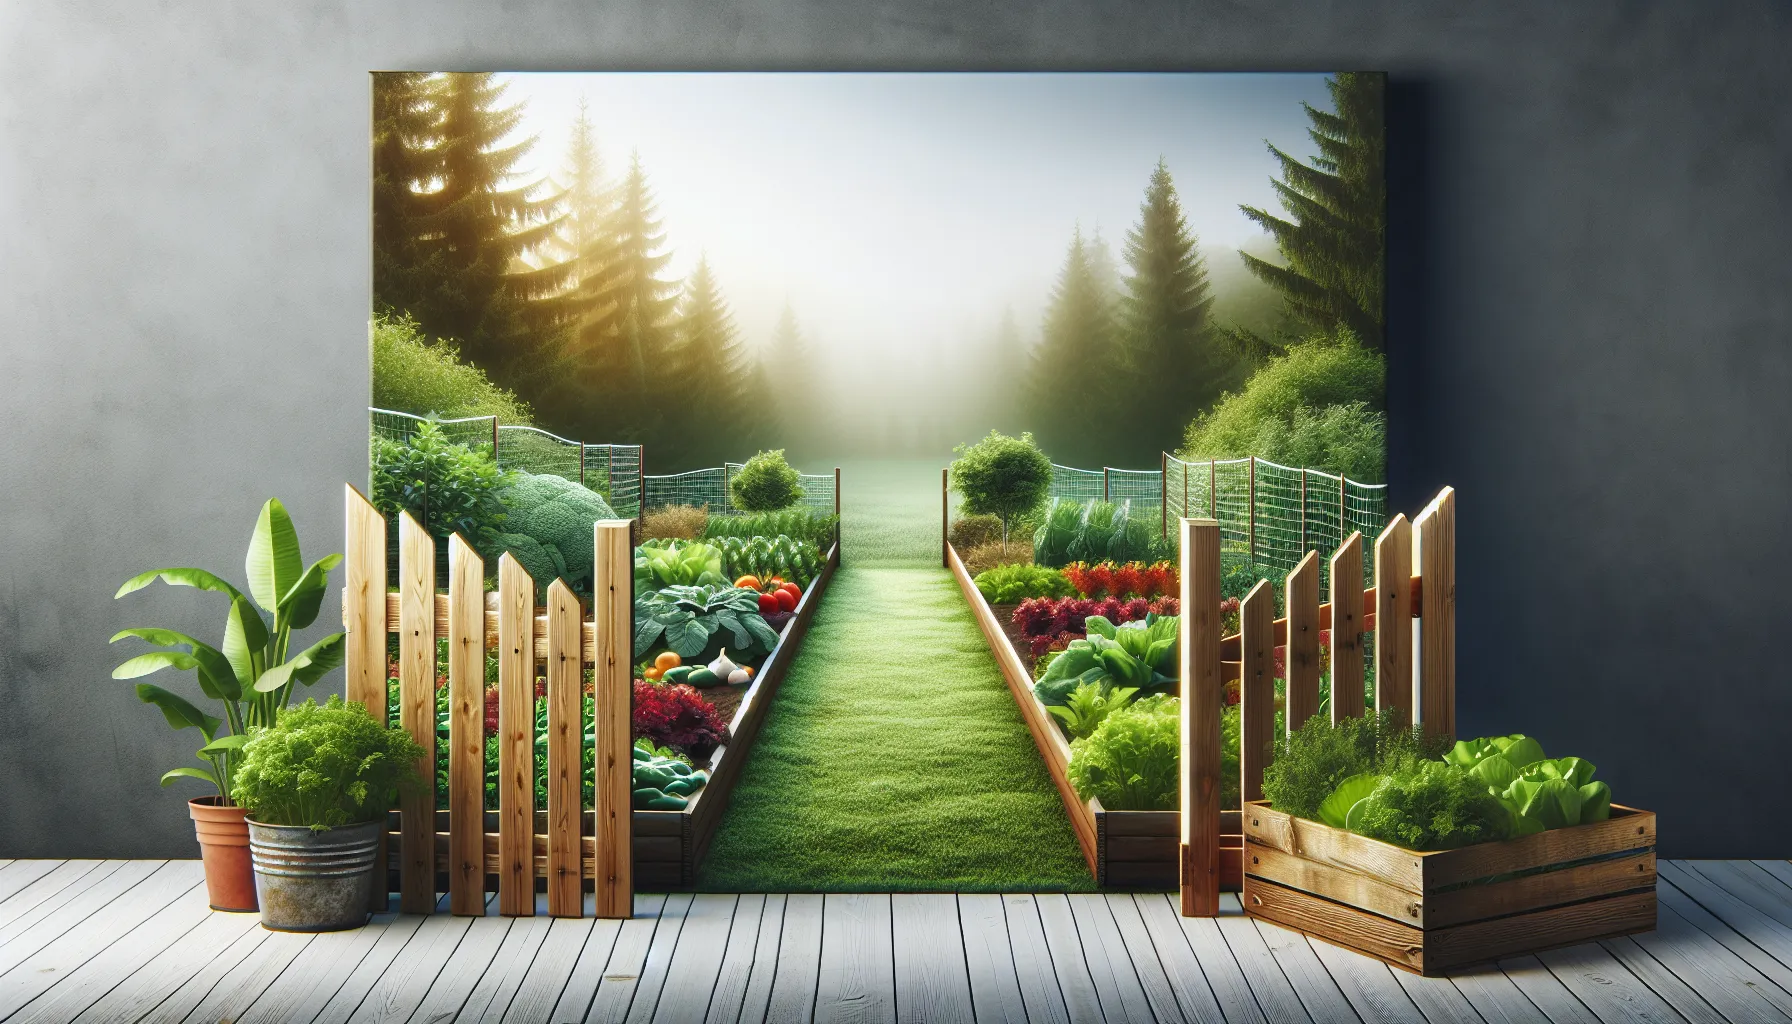 A lush vegetable garden is bordered by a wooden fence kit, with rows of vibrant greenery leading into a misty forest backdrop.